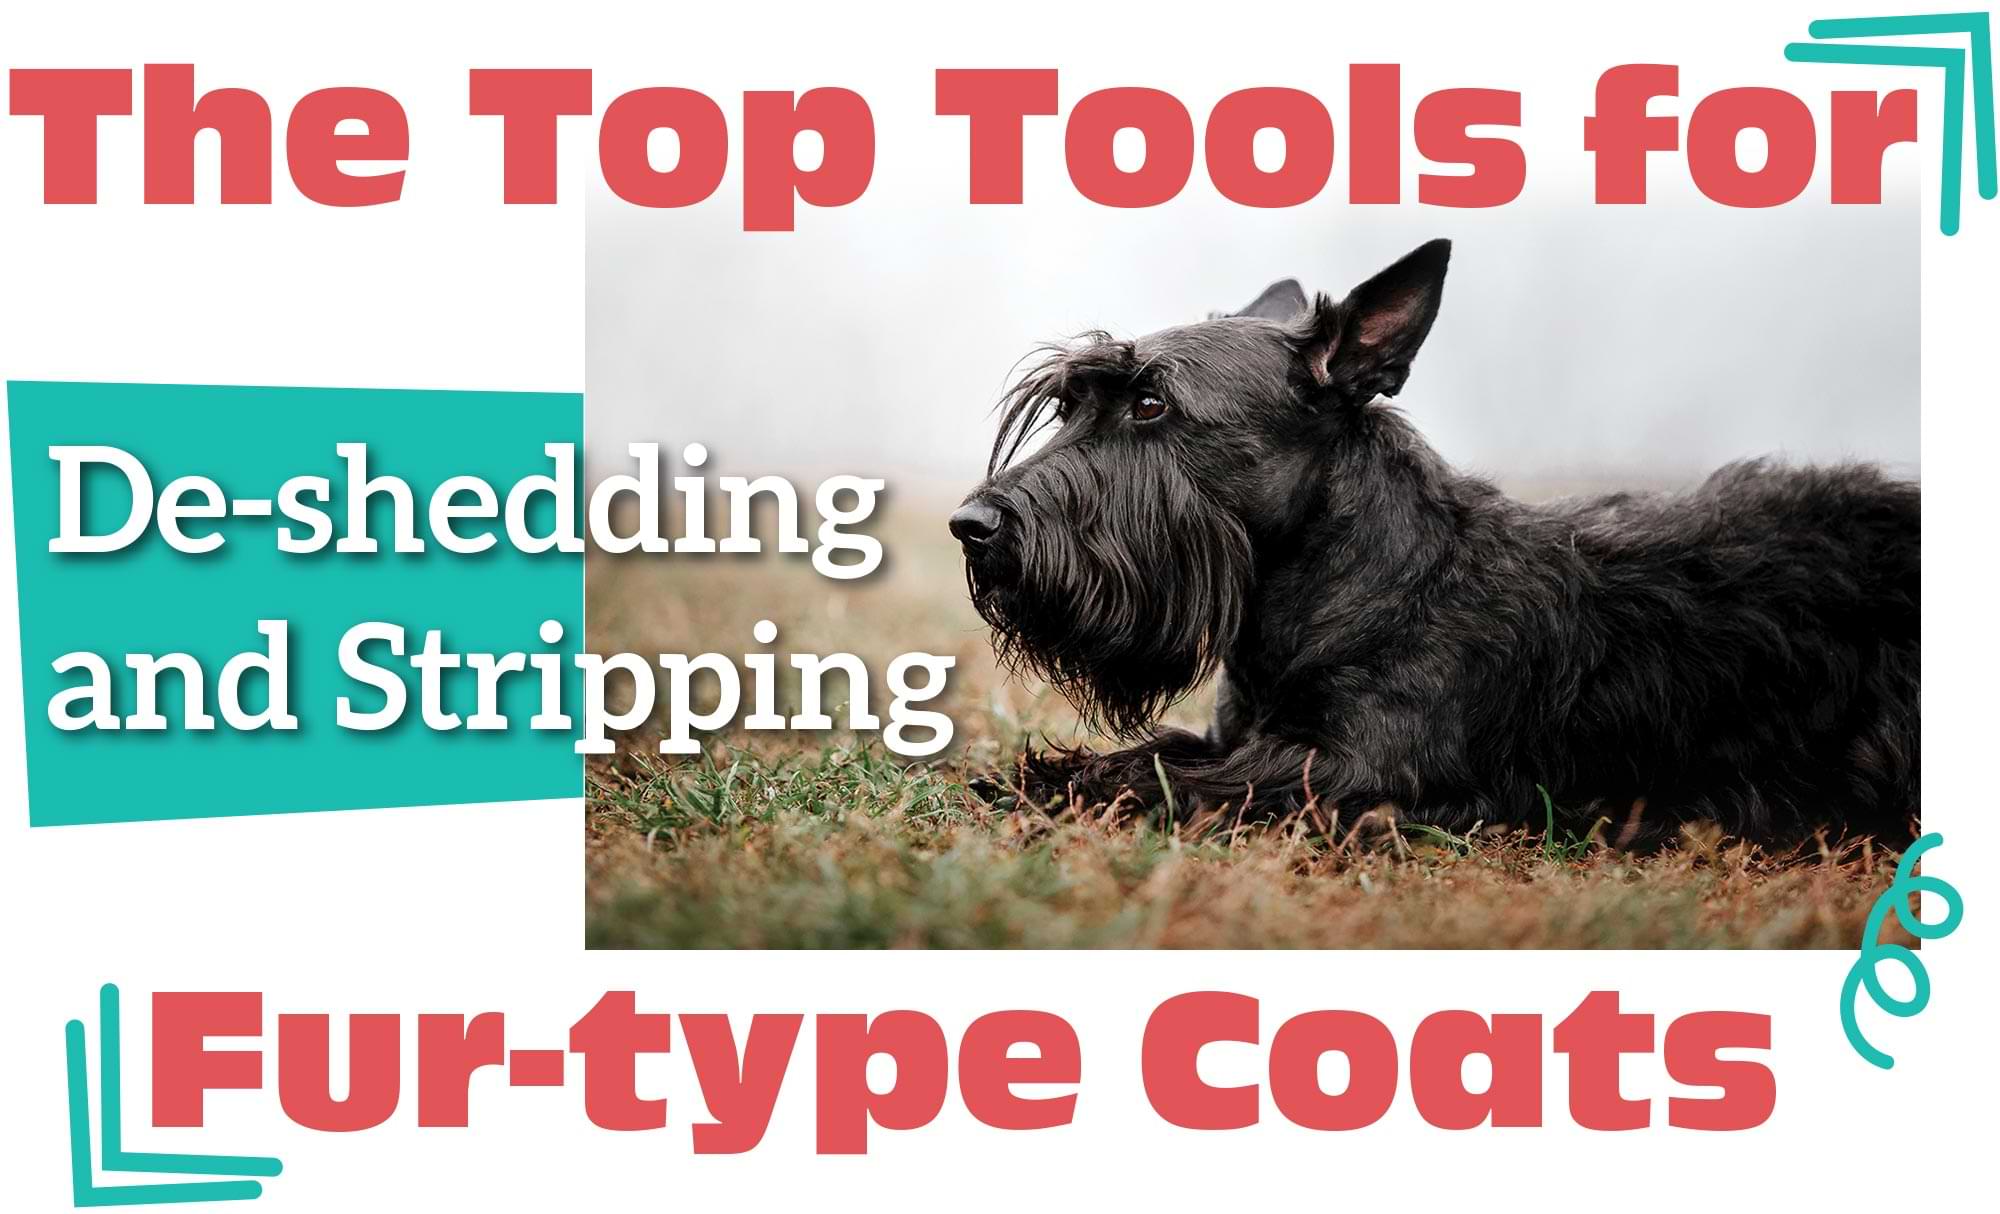 The Tools for De-shedding and Stripping Fur-type Coats title with an image of a black Scottish Terrier